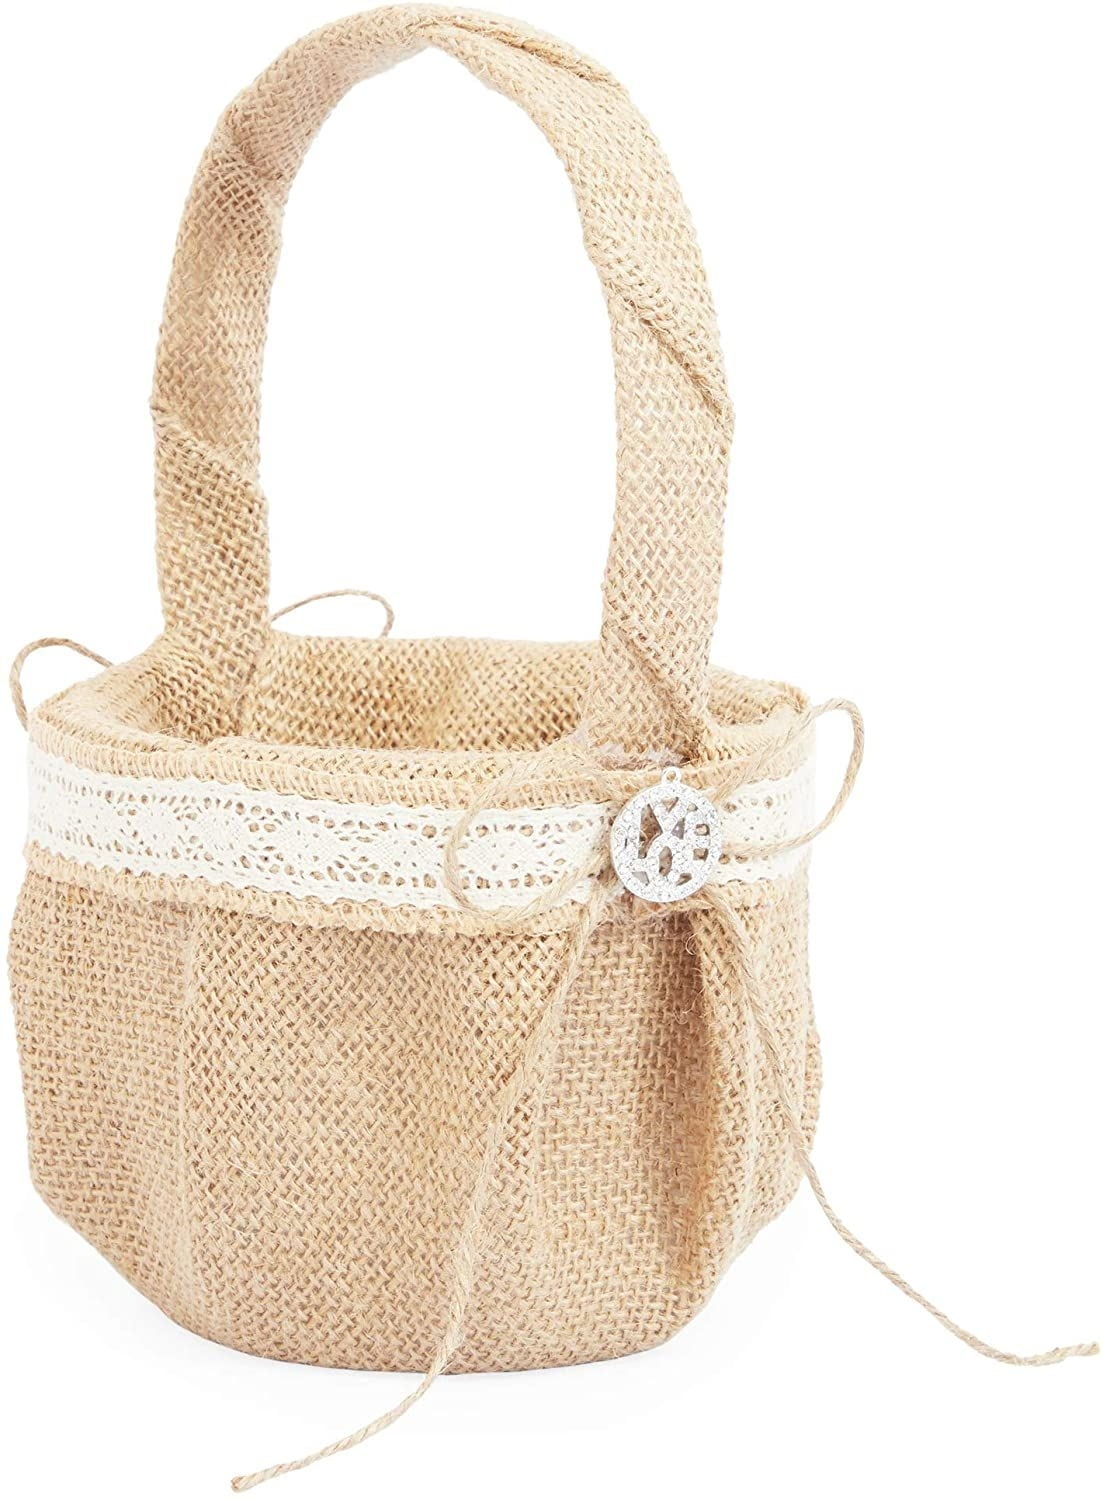 Burlap Hessian Lace Flower Girl Basket Rustic Country Vintage Wedding Prom 